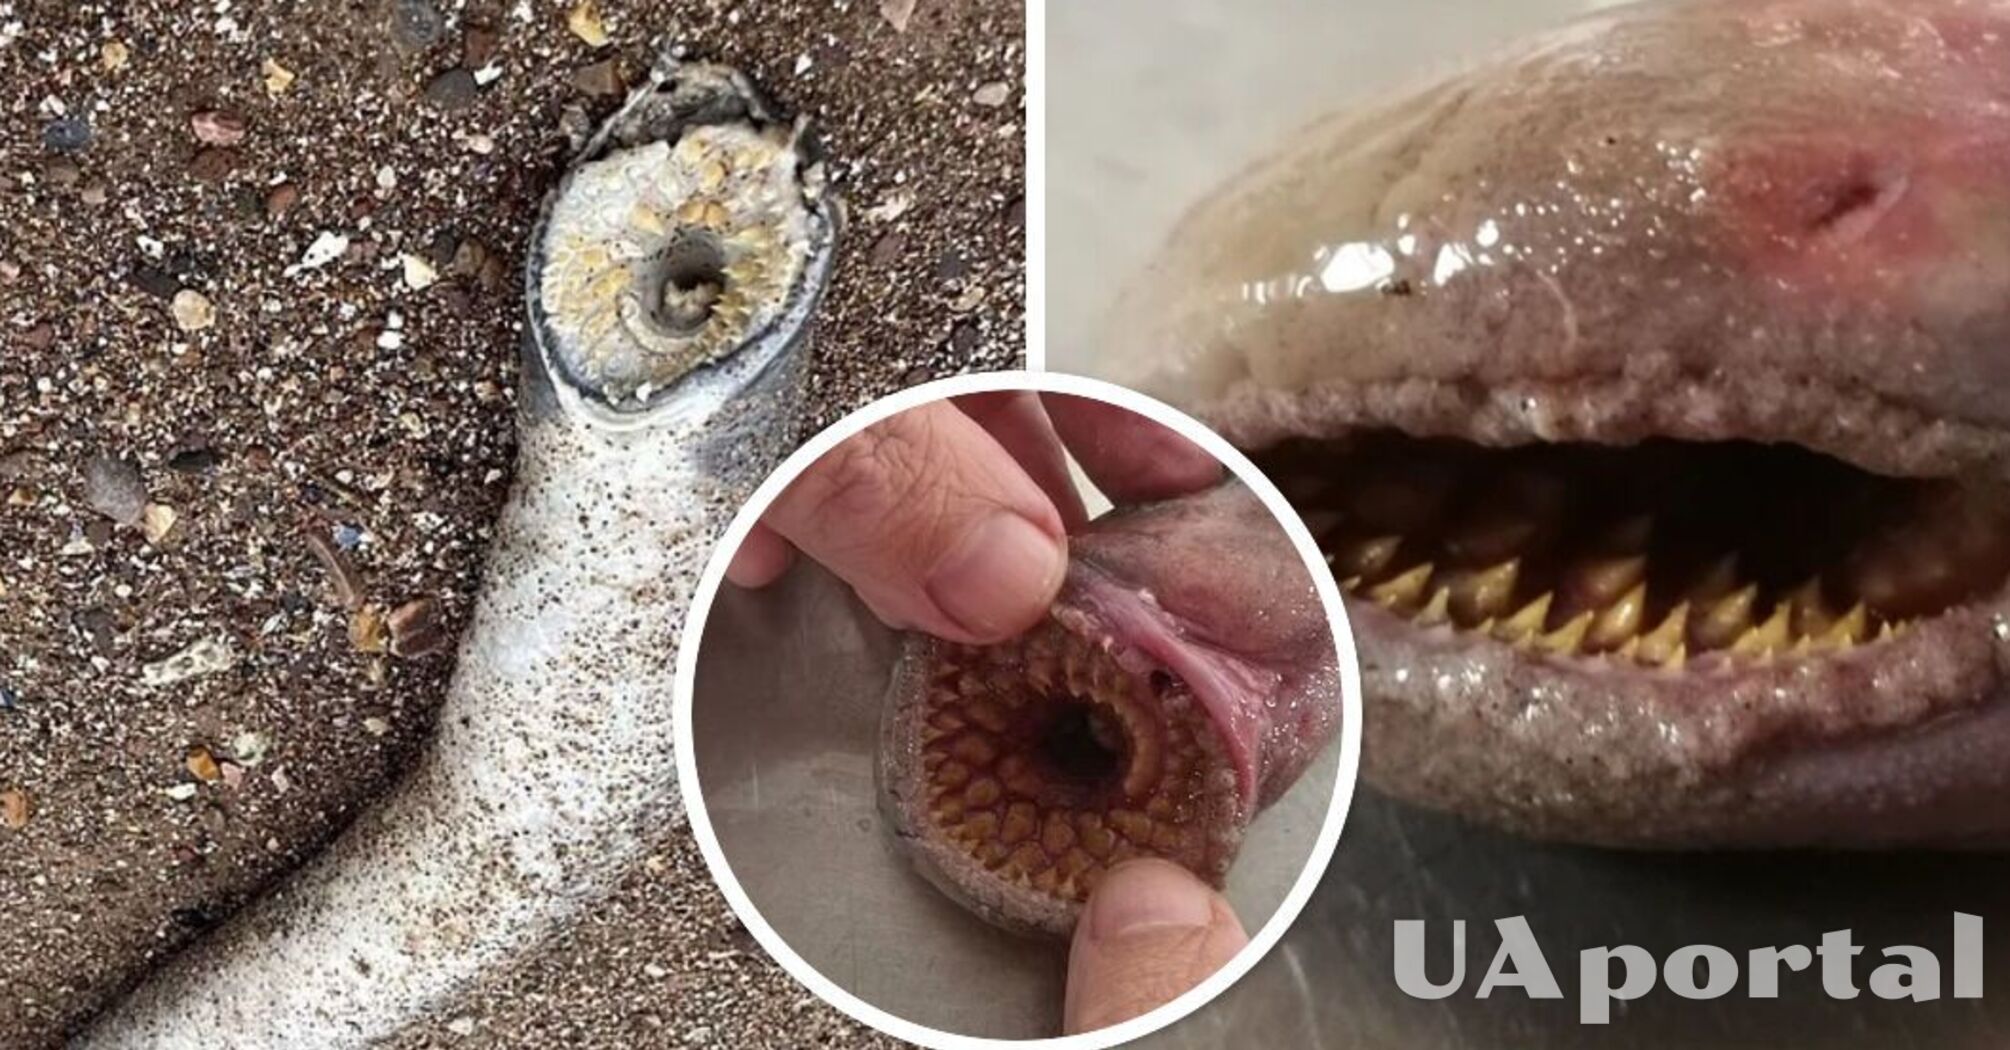 In Britain, a huge toothy worm was found on the beach, similar to the sand worms from "Dune" (photo and video)